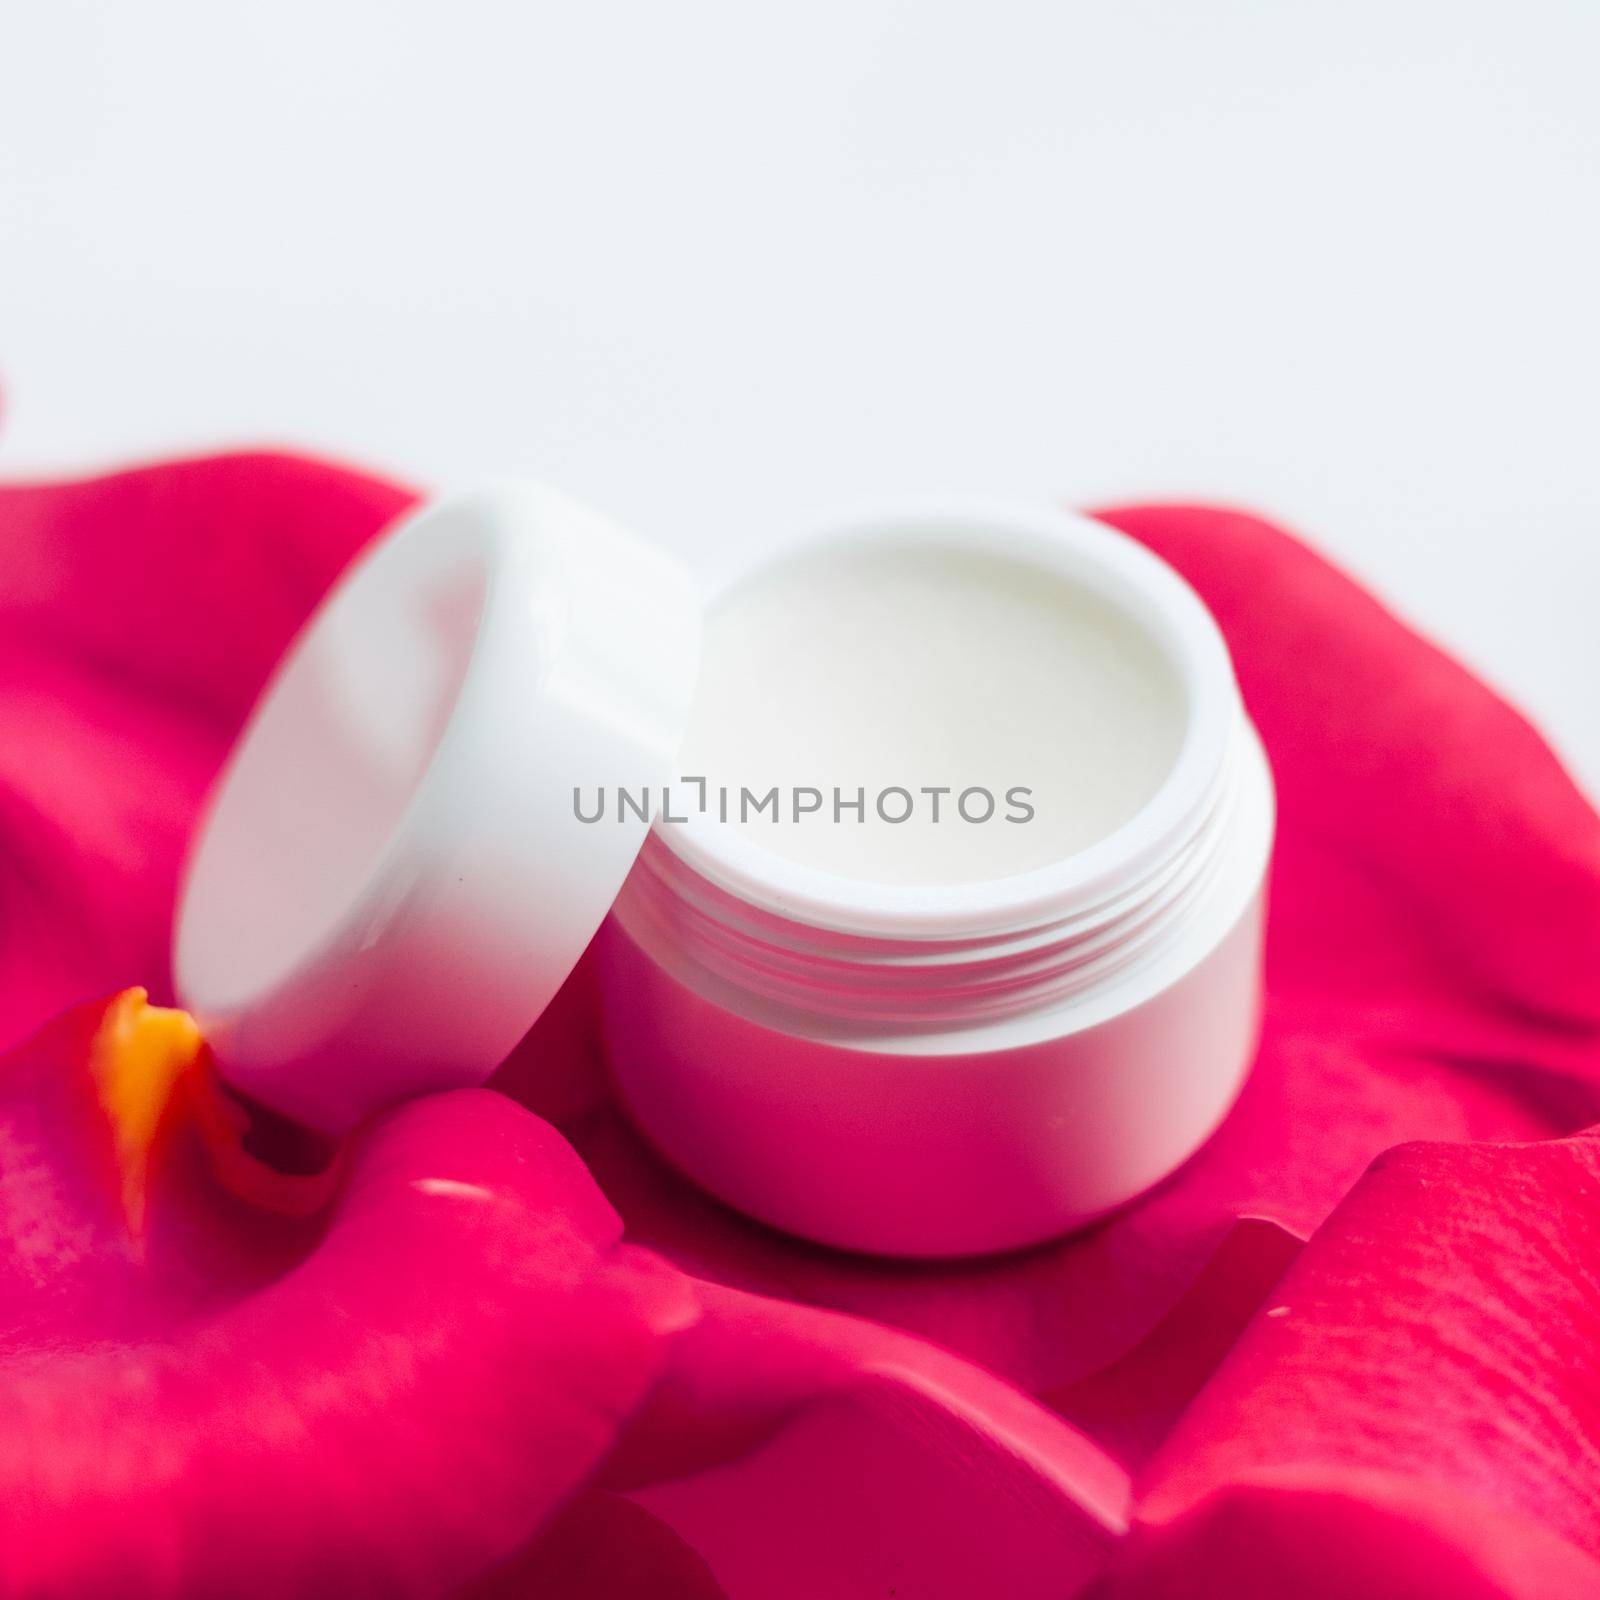 beauty cream jar and rose petals - cosmetics with flowers styled concept by Anneleven